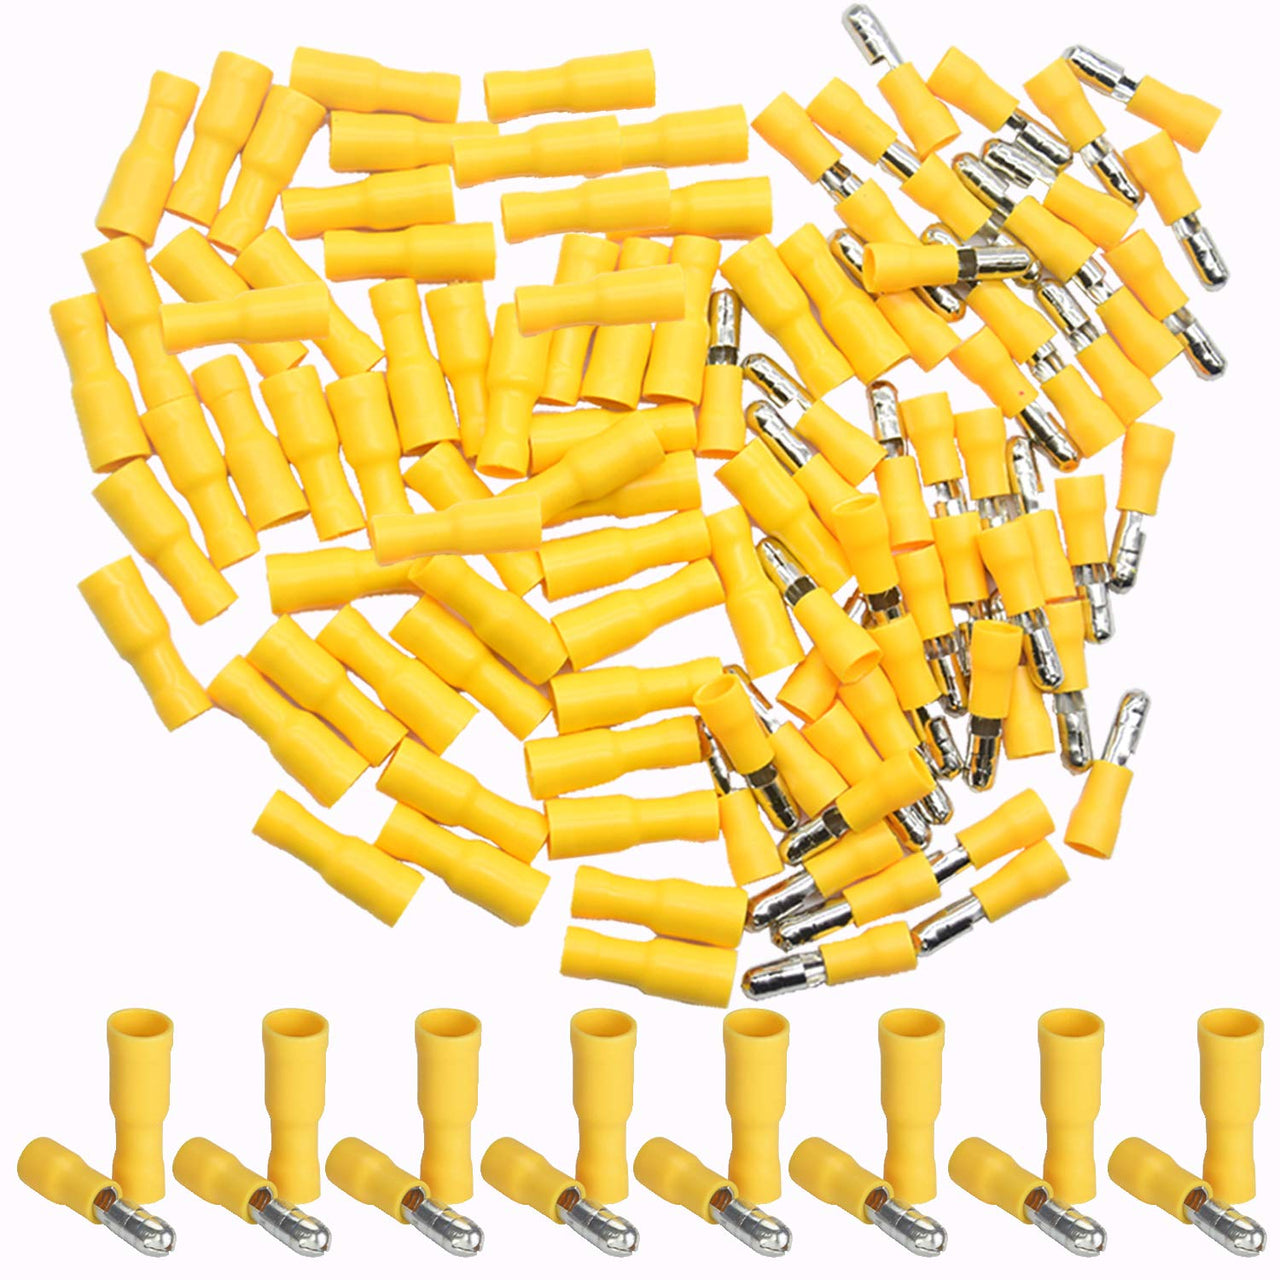 Absolute 100Pcs 12-10 AWG of Yellow Insulated Female Male Bullet Connector Quick Splice Wire Terminals Wire Crimp Connectors